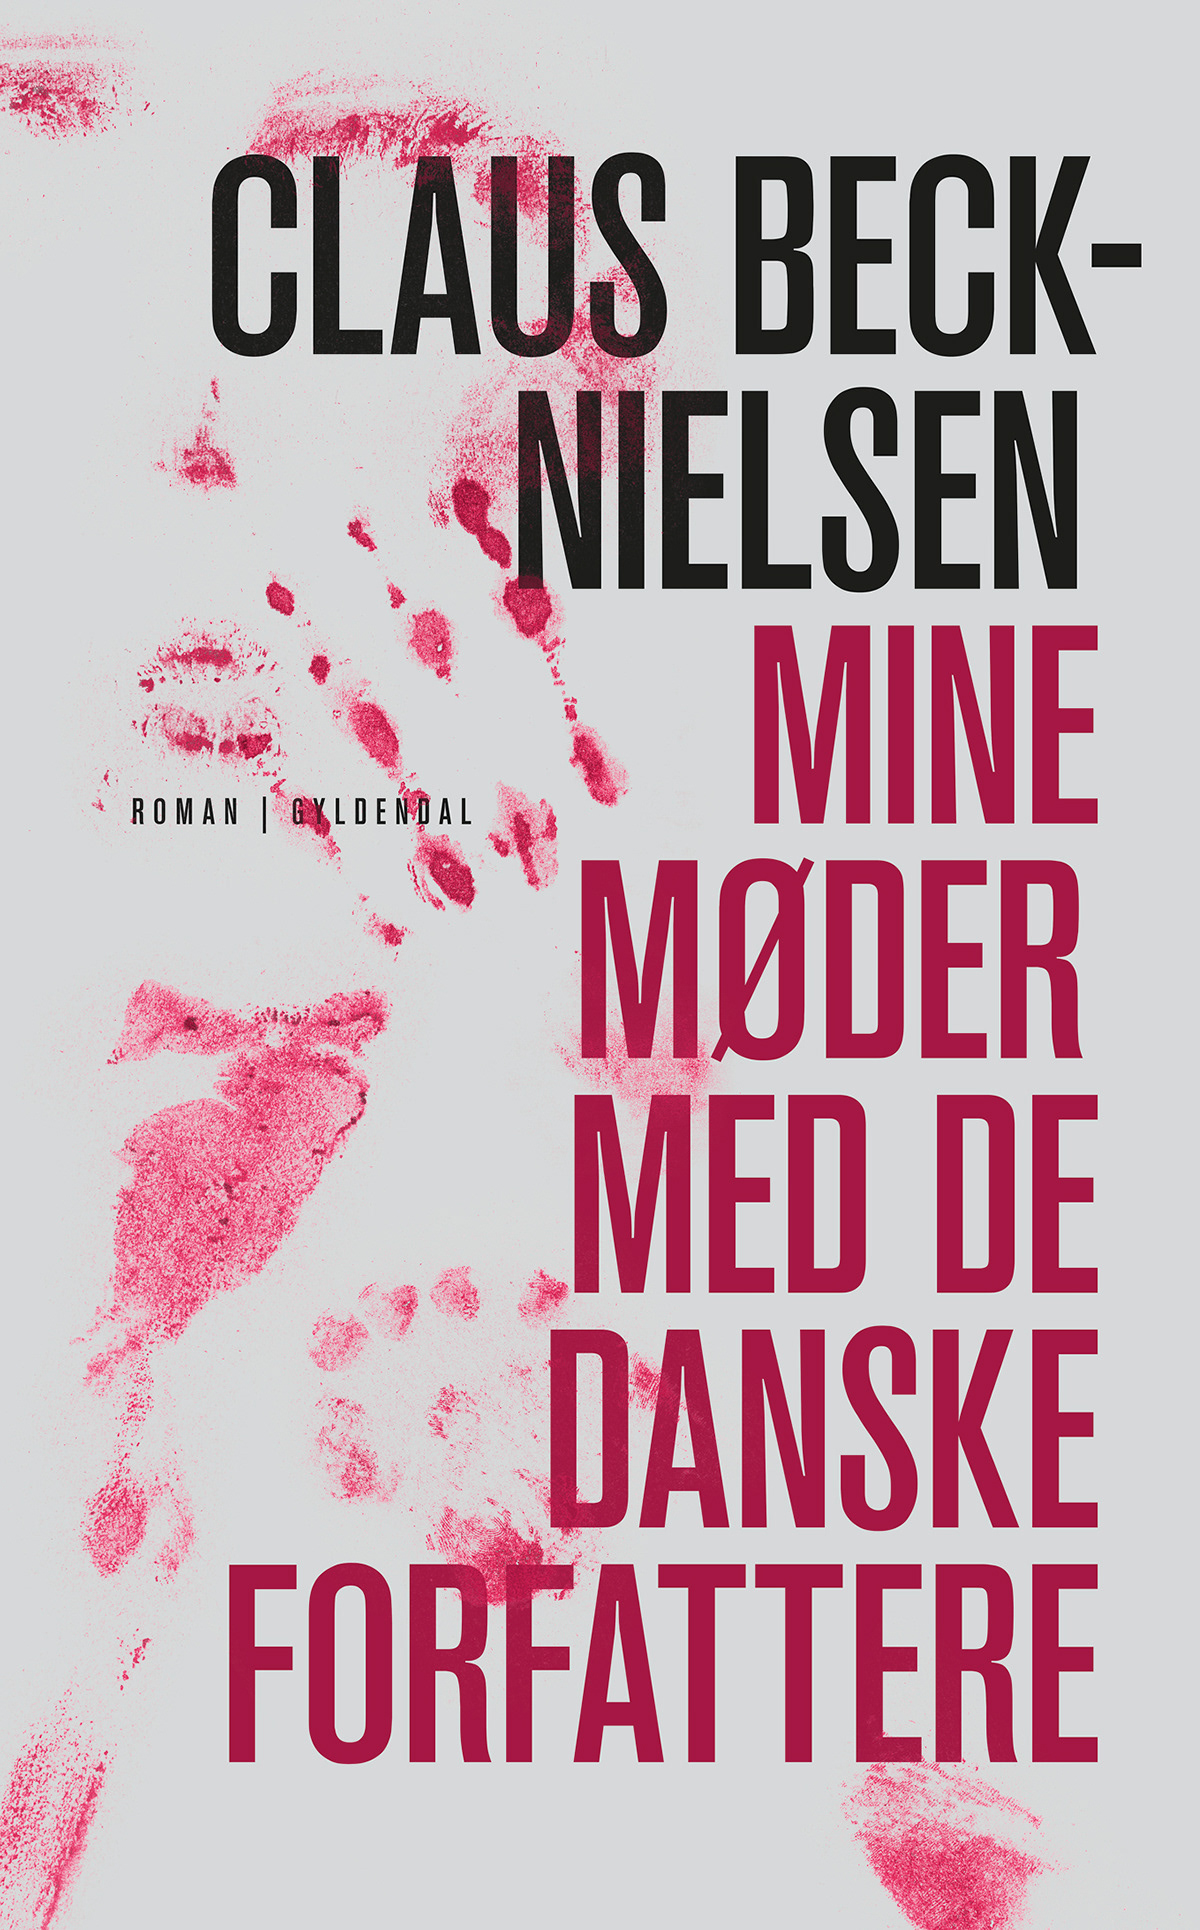 claus beck-nielsen cover  book